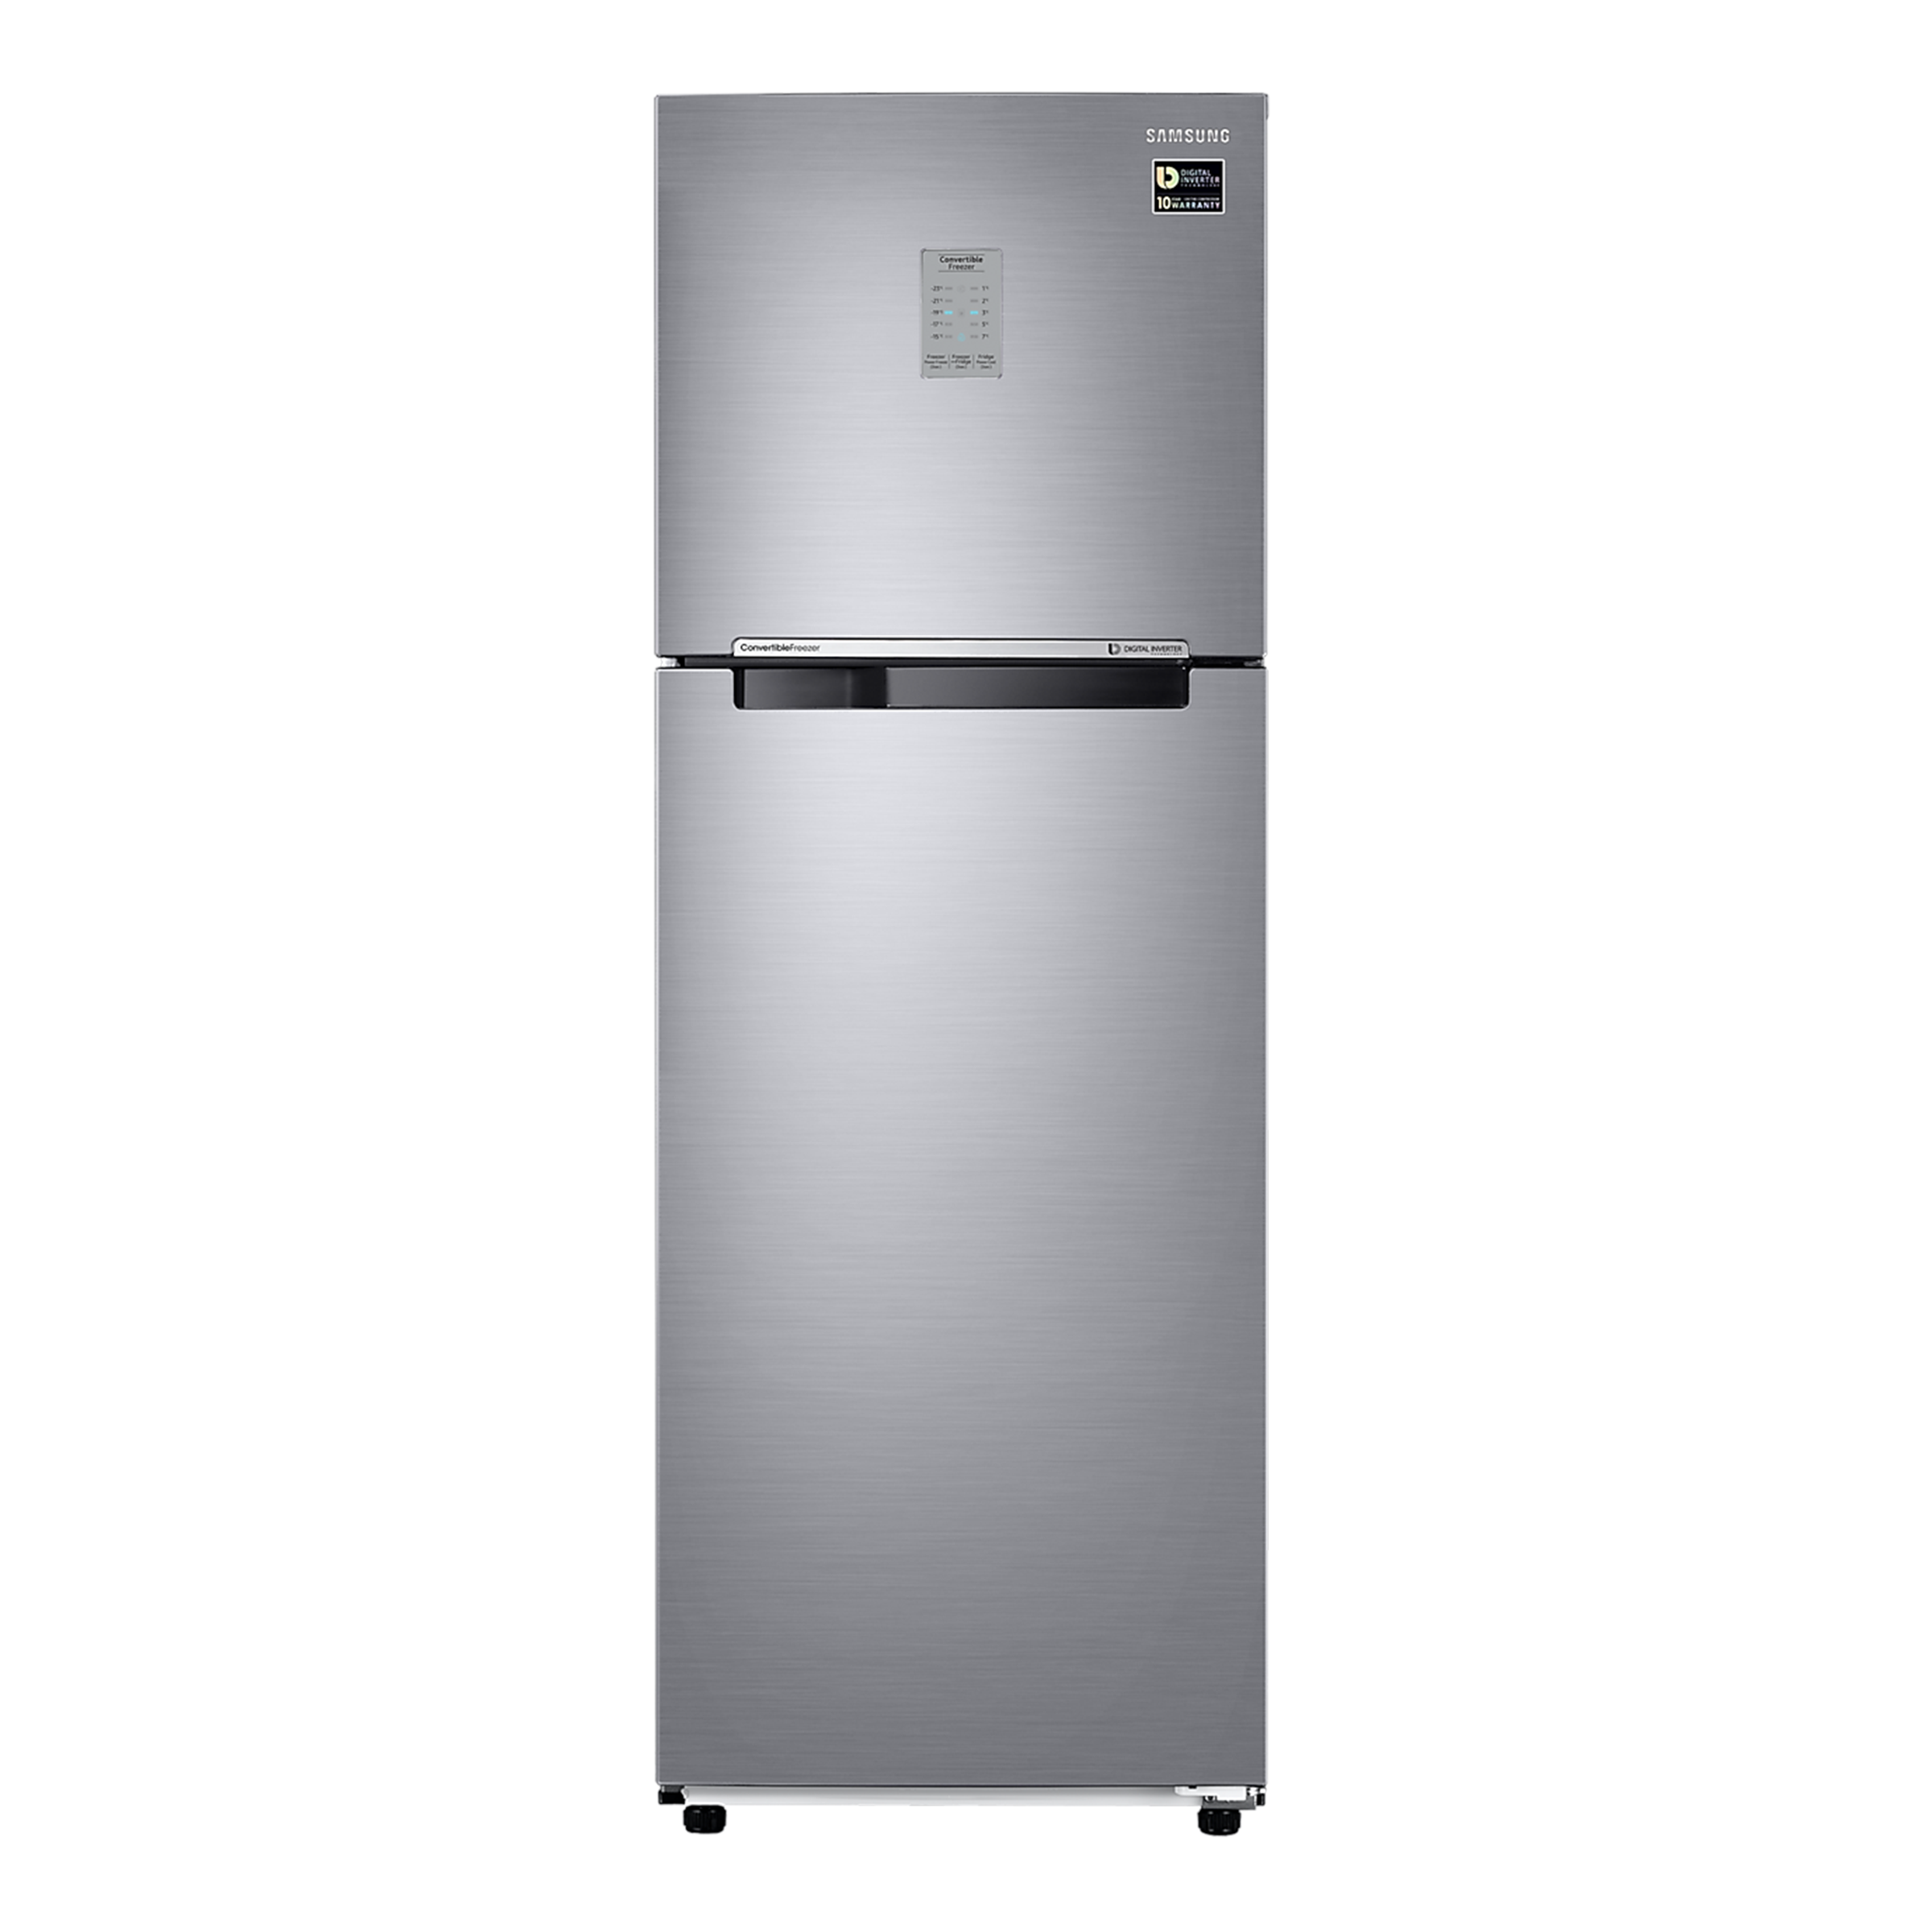 

SAMSUNG 275 Litres 3 Star Frost Free Double Door Convertible Refrigerator with Twin Cooling Plus Technology (RT30T3743S9/HL, Refined Inox), No color